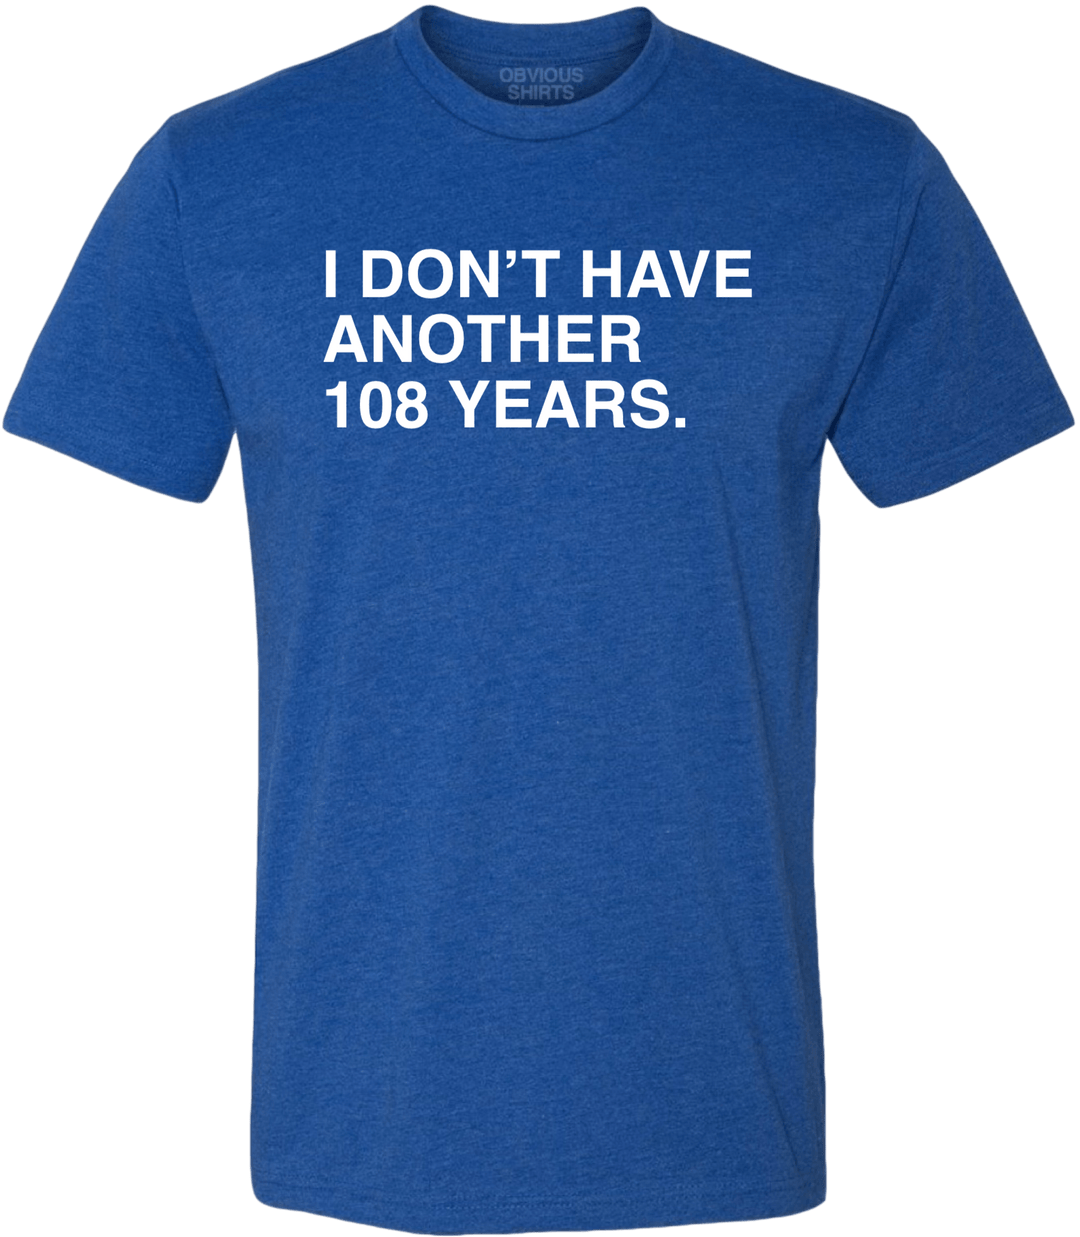 I DON'T HAVE ANOTHER 108 YEARS. - OBVIOUS SHIRTS.